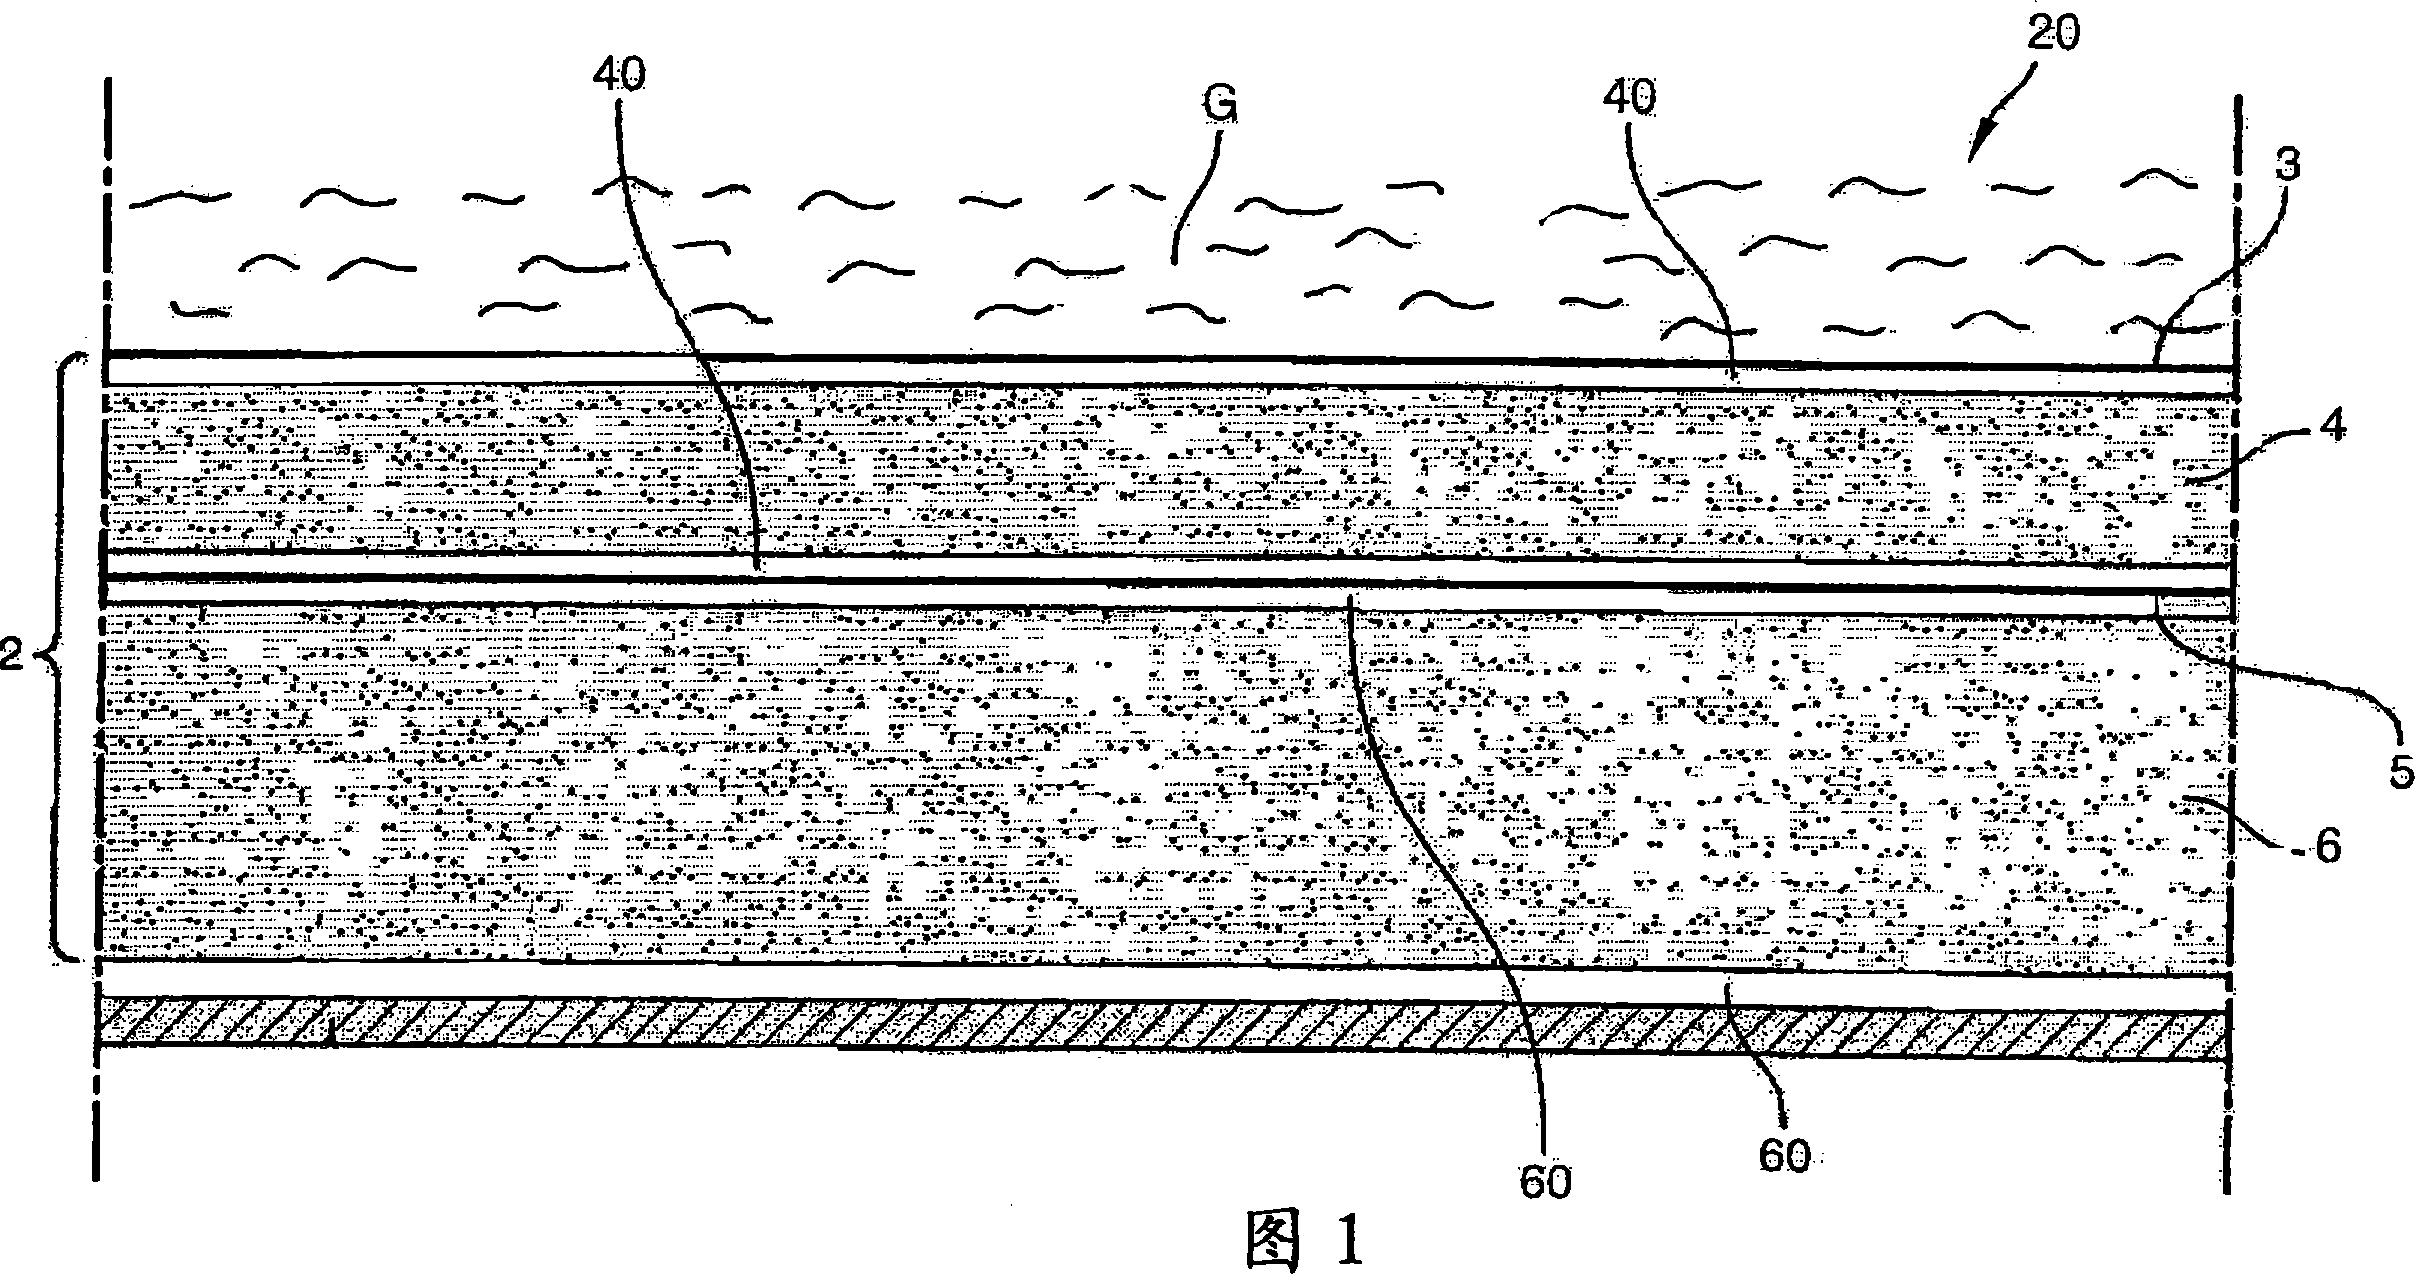 Method for measuring the actual porosity of the watertightness barrier of a fluid containment tank